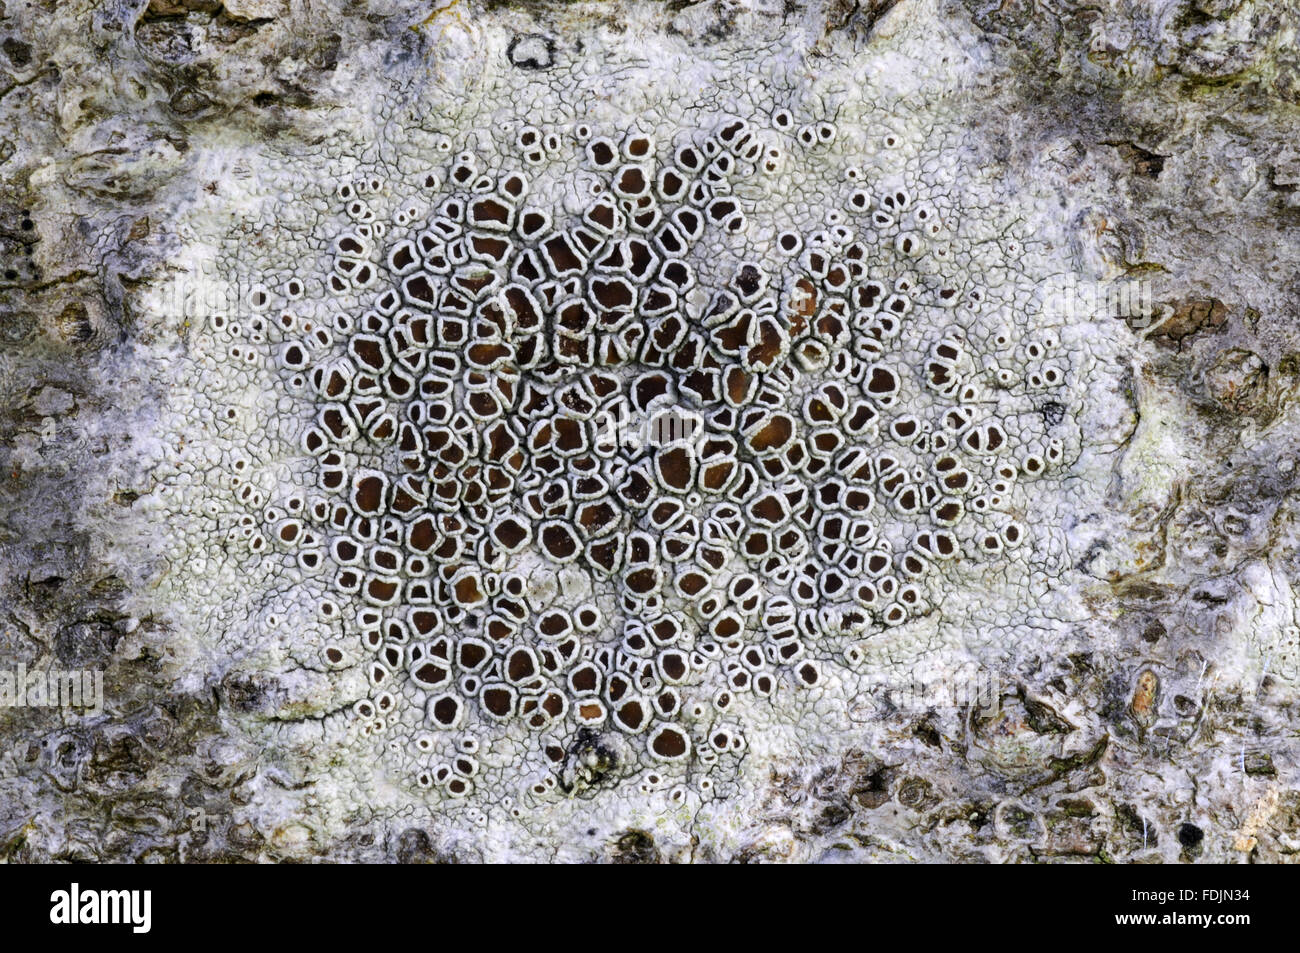 Black shields lichen (Lecanora chlarotera) photographed on a tree trunk at Arlington Court, Devon in October. Lichen thrives in this location because the air is so moist and clean. Stock Photo